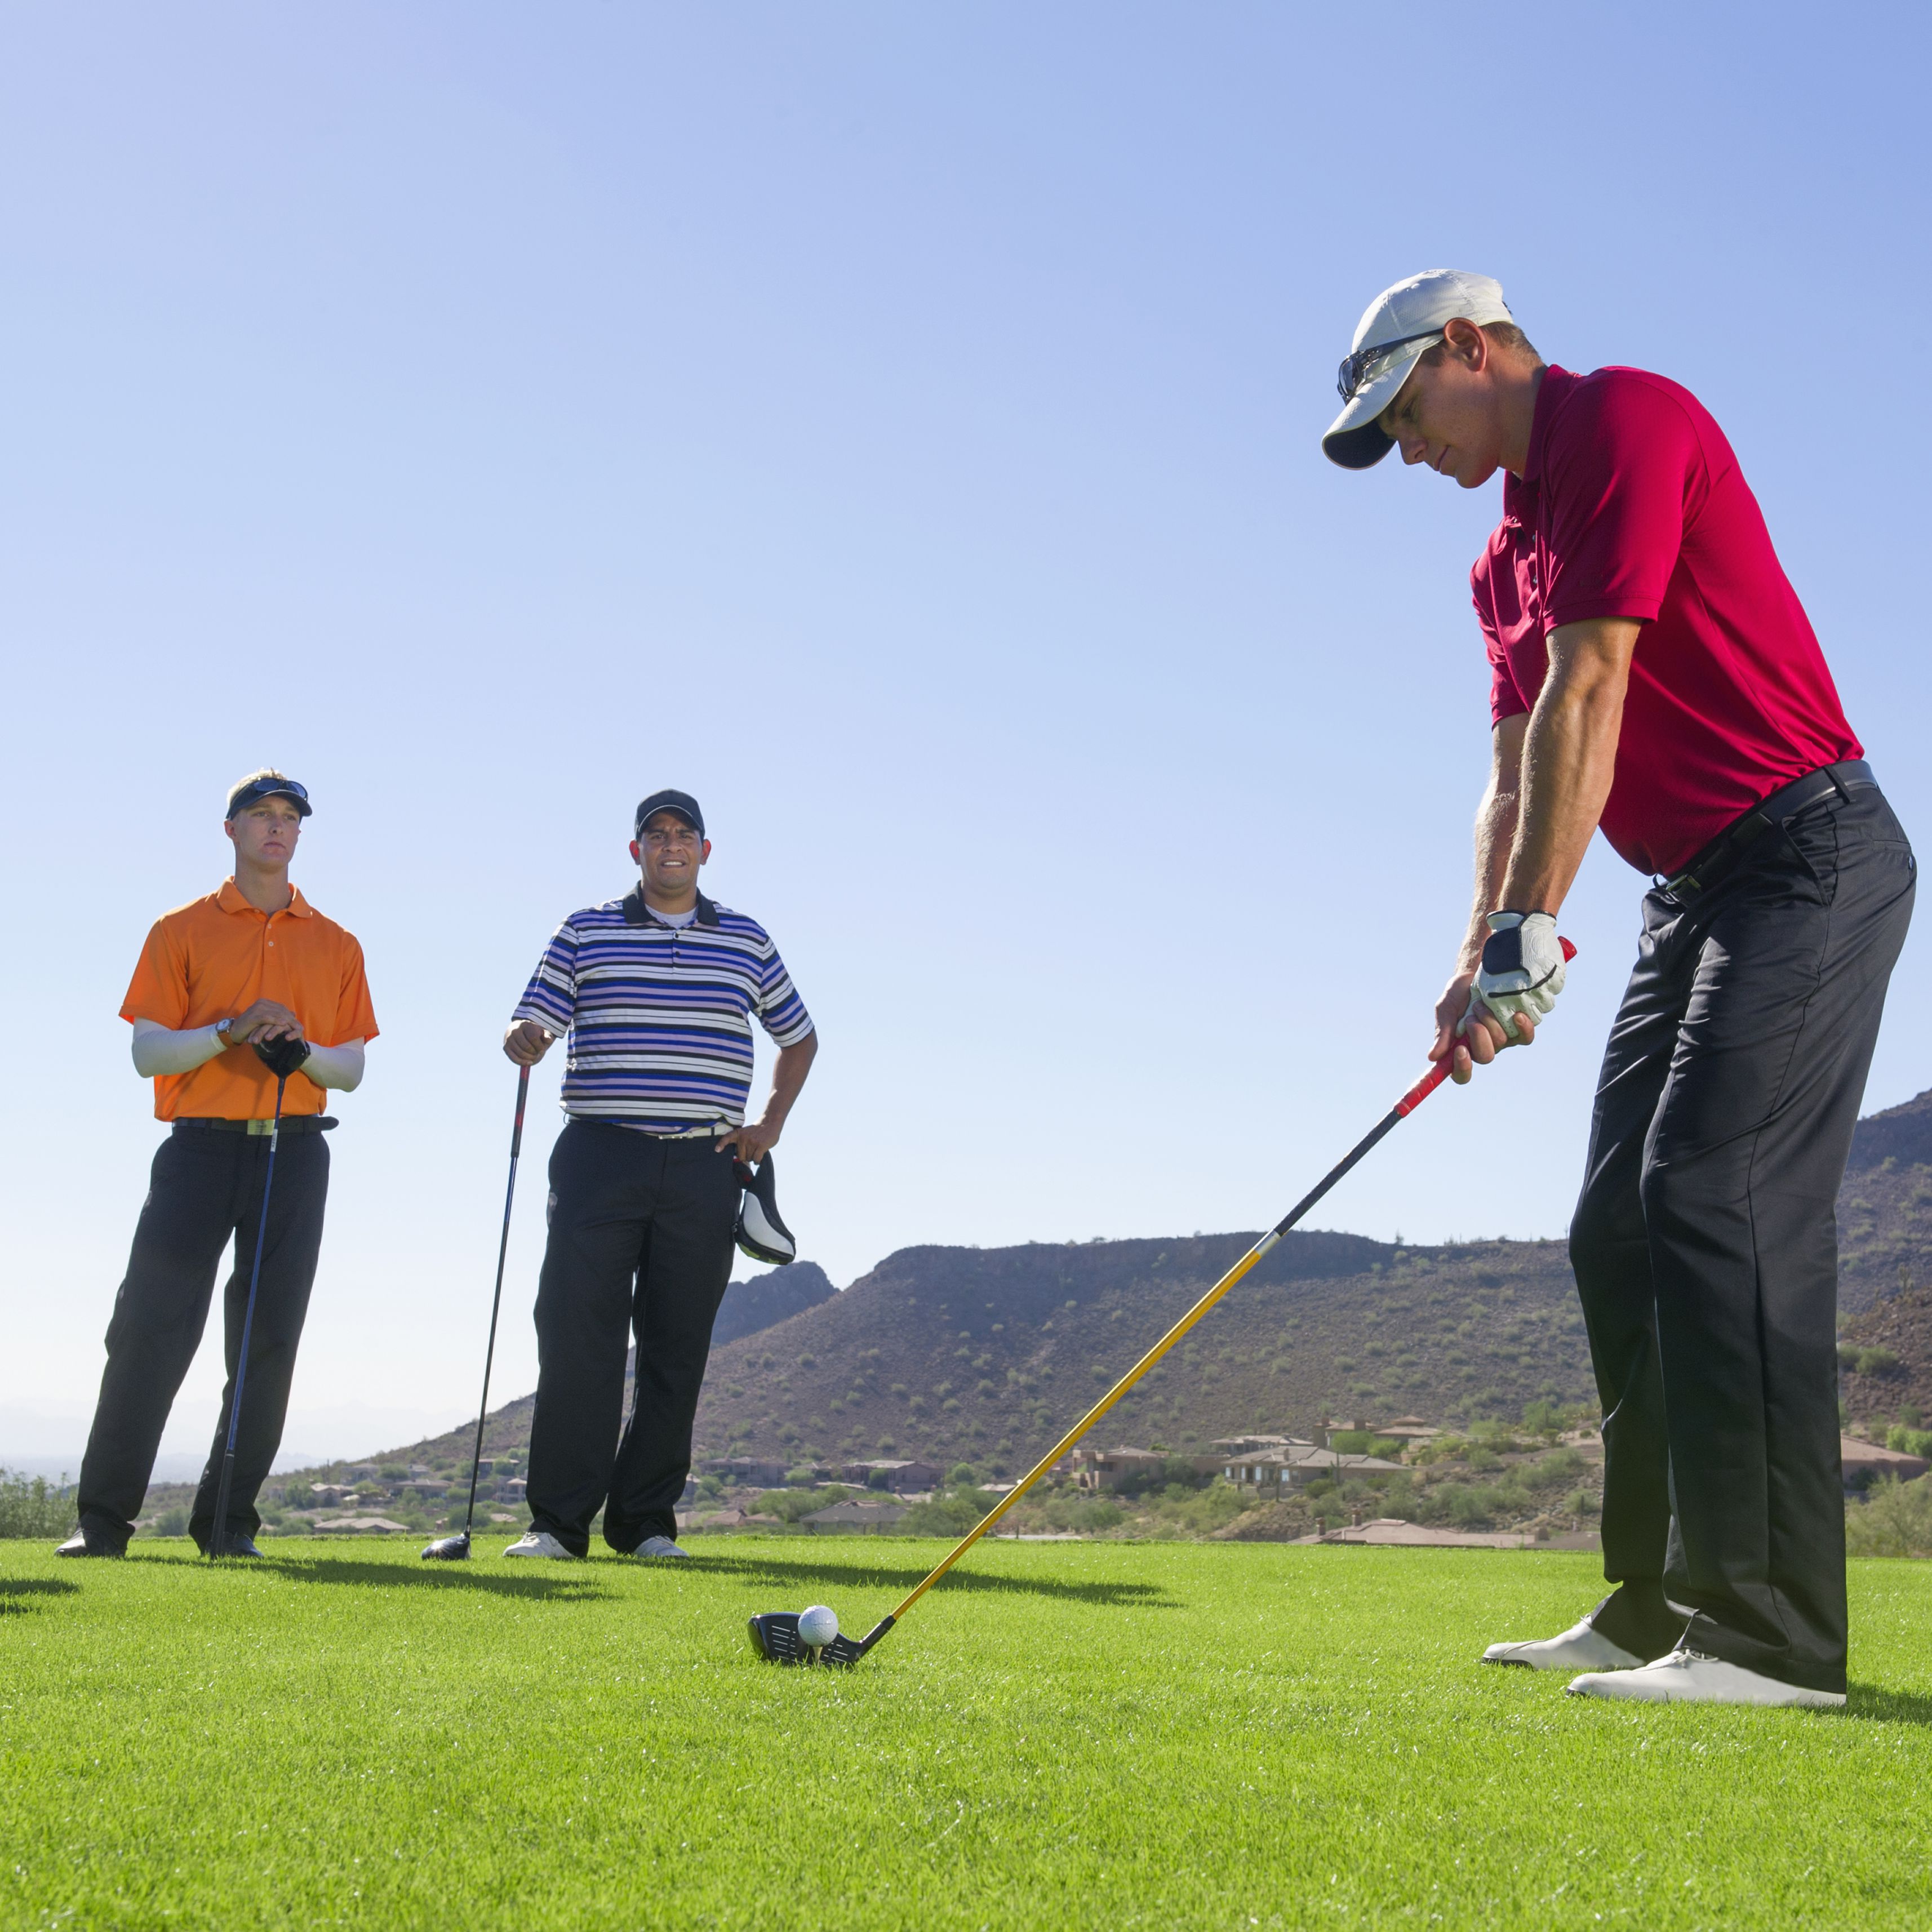 Three ways to improve your golf swing at home
